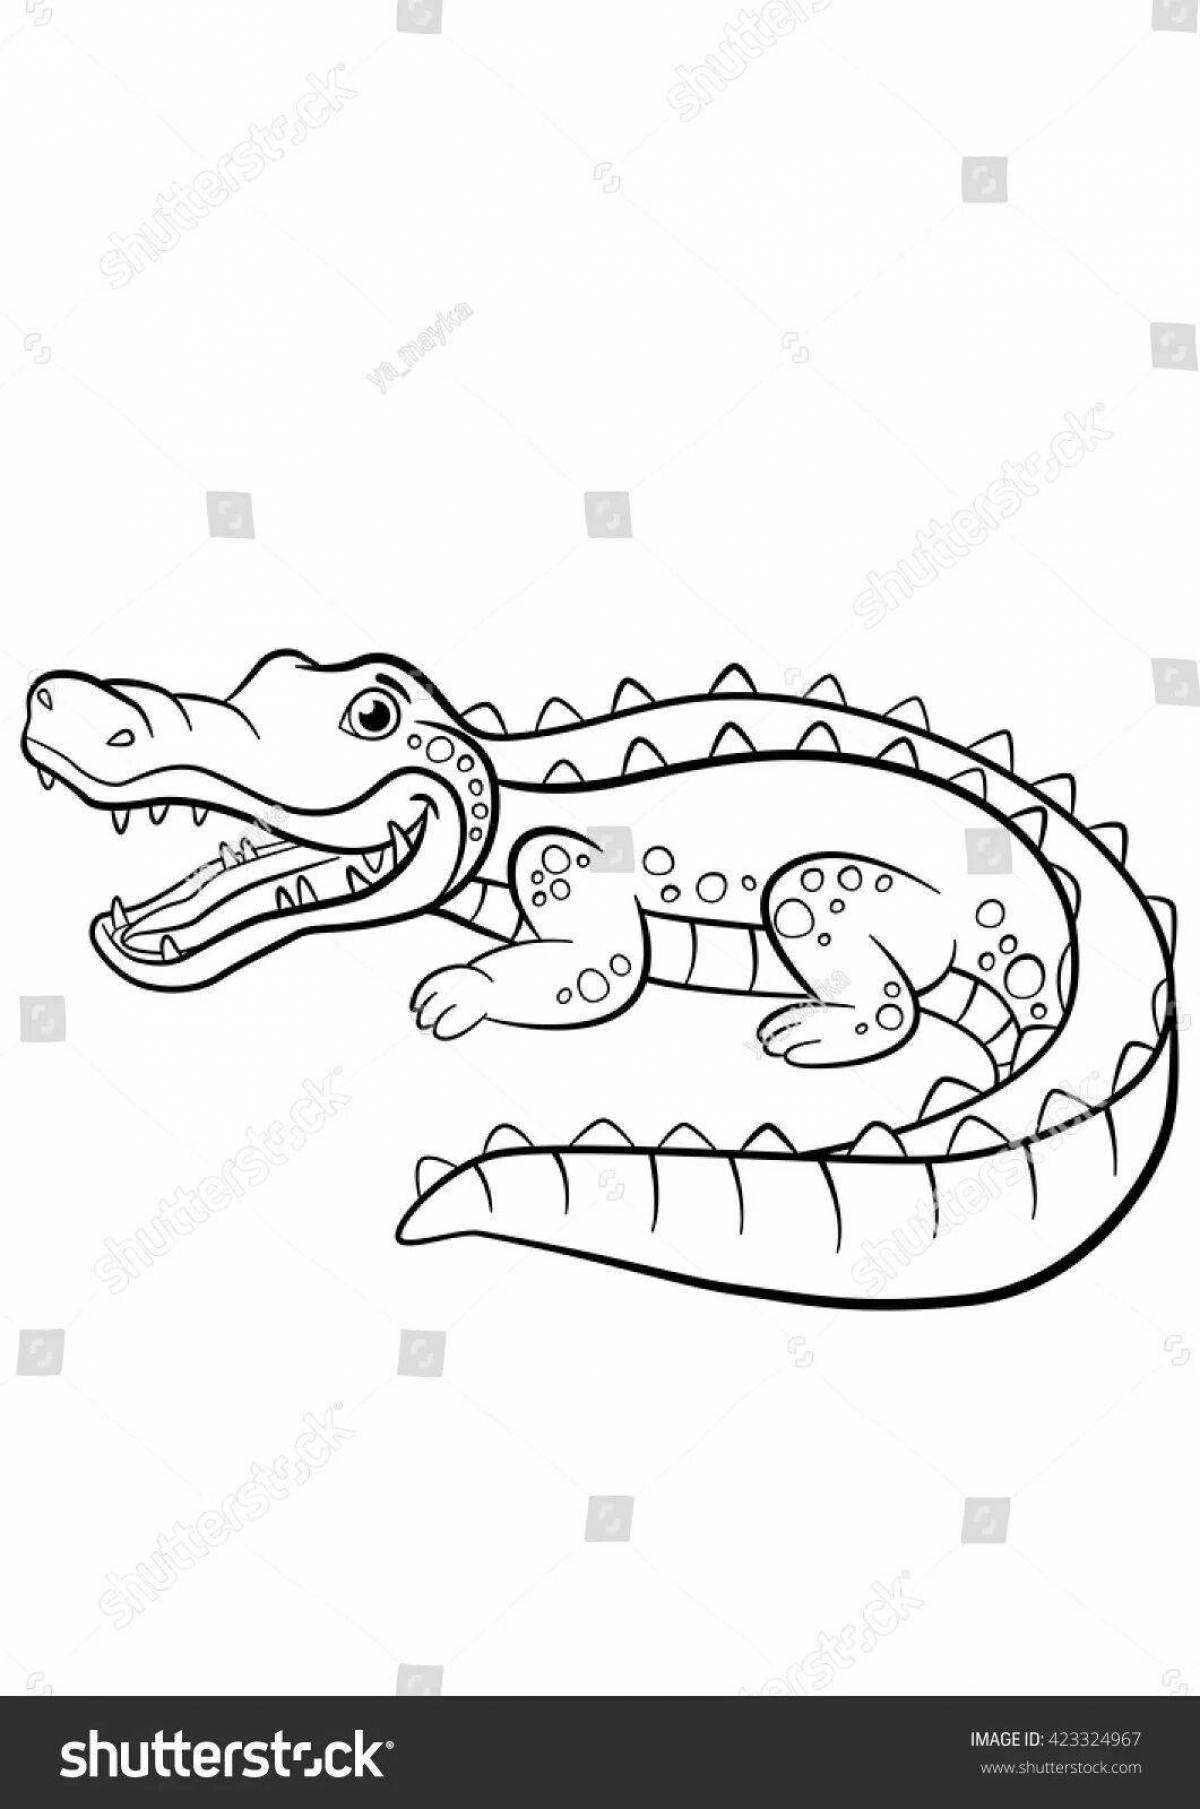 Coloring page of the adorable crested crocodile